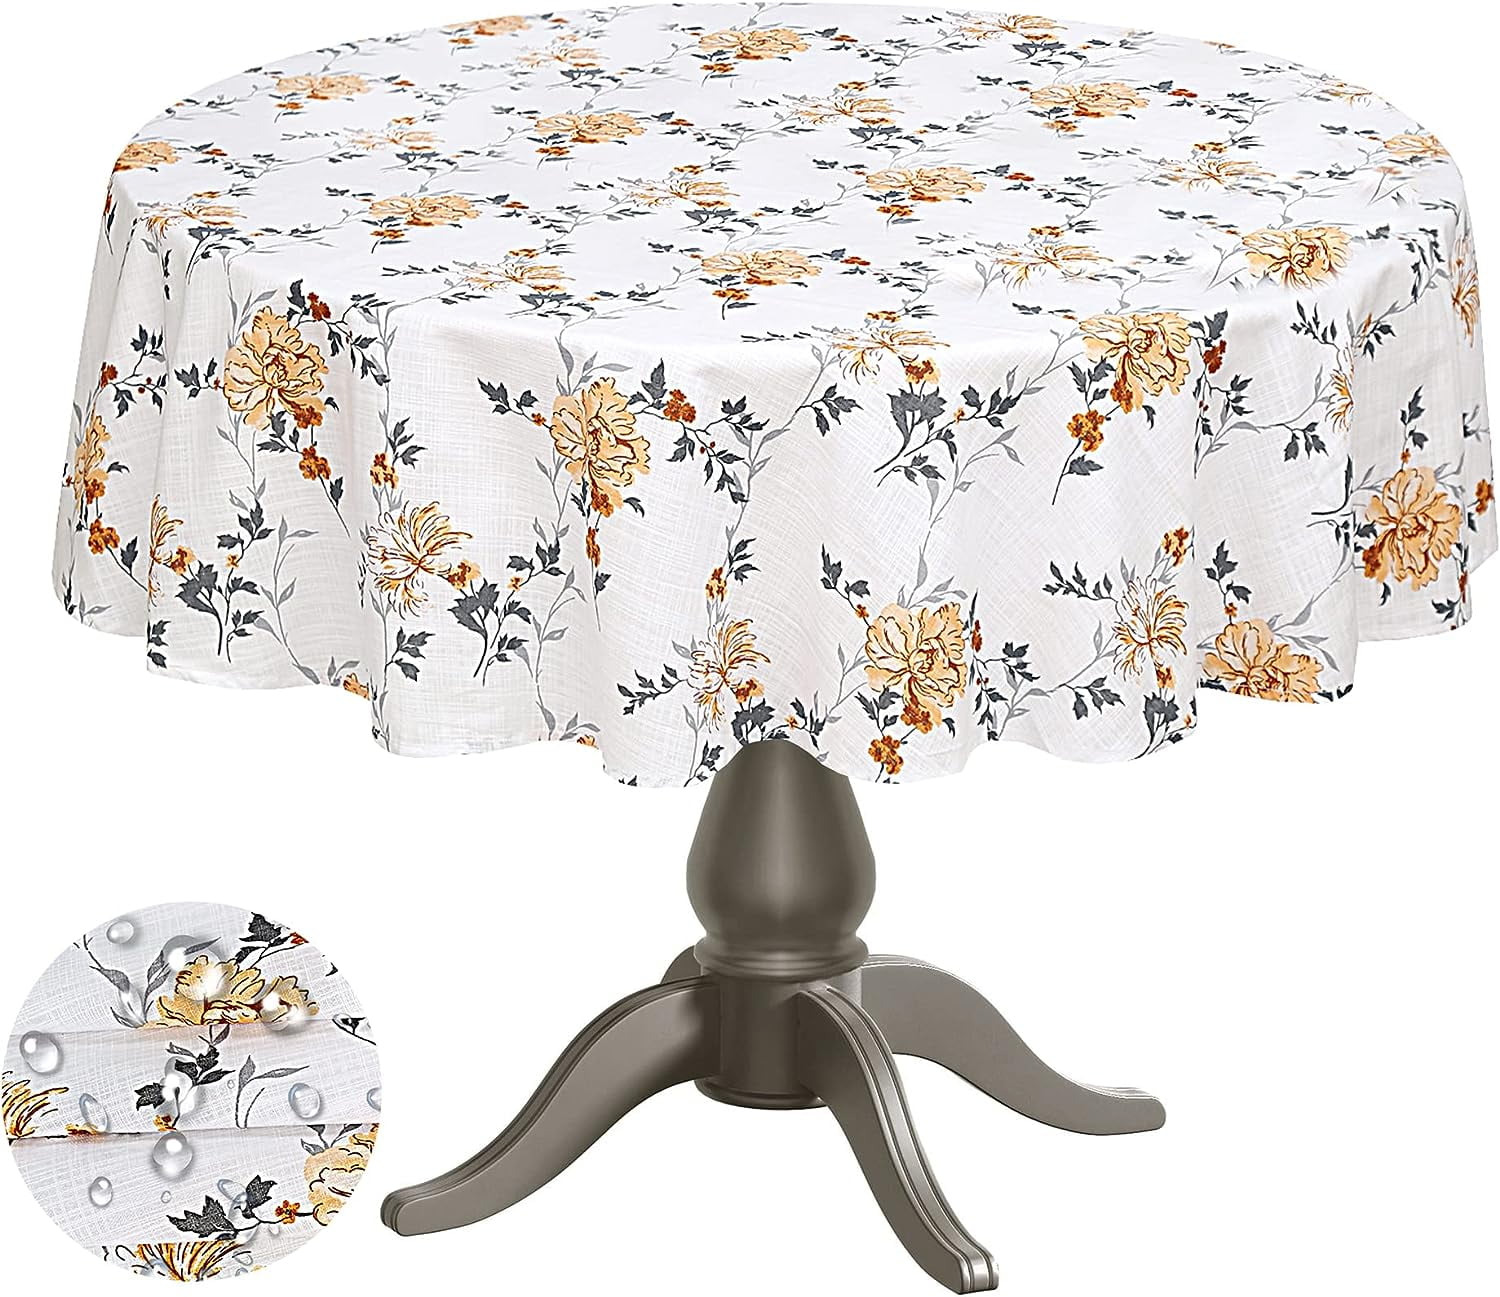 Ruvanti Round Tablecloth 70 inch, for 3-6 Feet Tables, Round Table Cover is Stain Resistant, Washable. Perfect for Indoor, Outdoor Tablecloth, Kitchen, Dining, Wedding, Parties - Orange Grey Floral